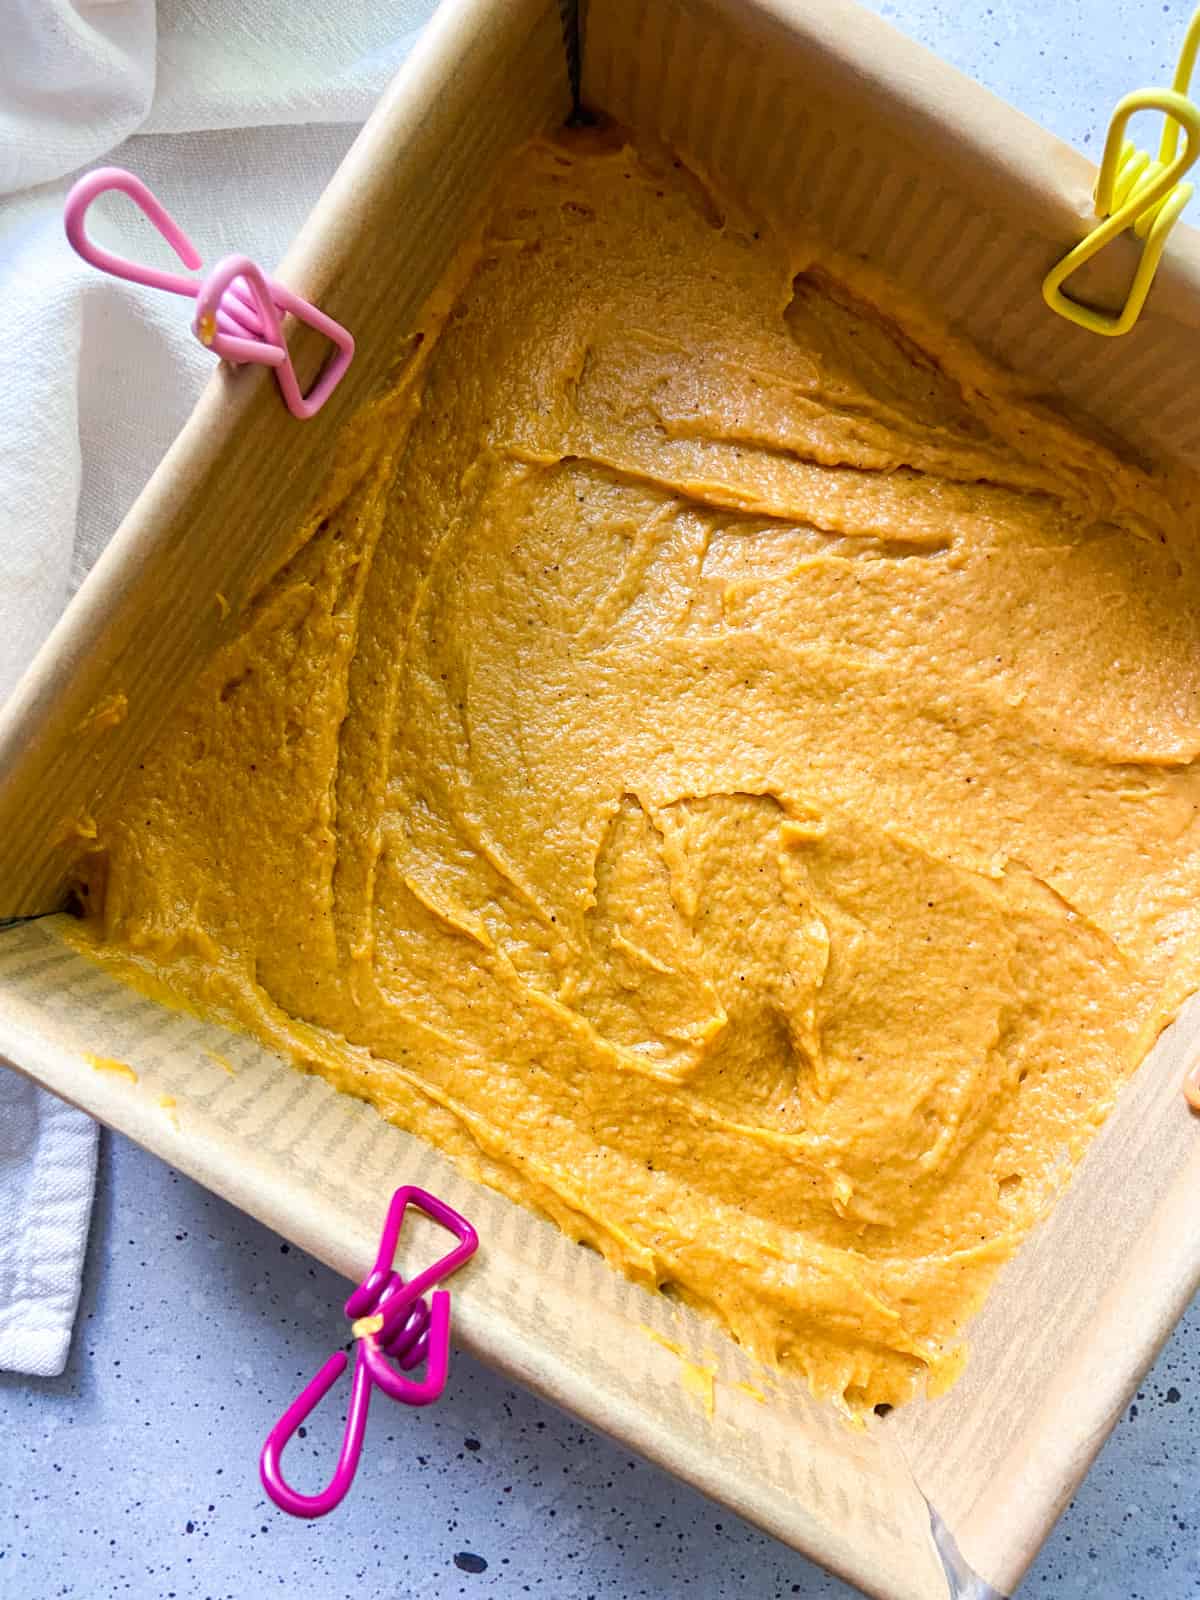 Pumpkin cake batter spread into the base of a parchment-lined baking pan.